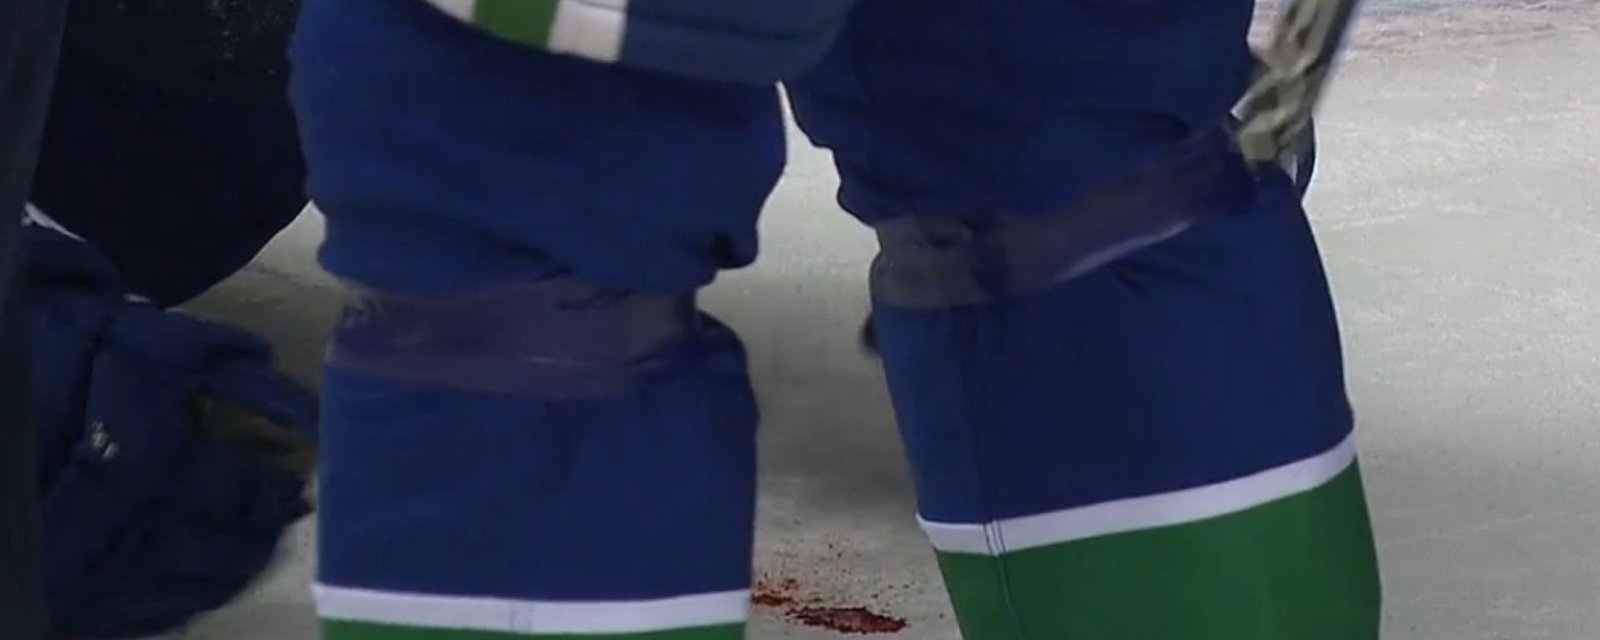 Defenseman leaves a bloody mess on the ice after taking a shot to the face.